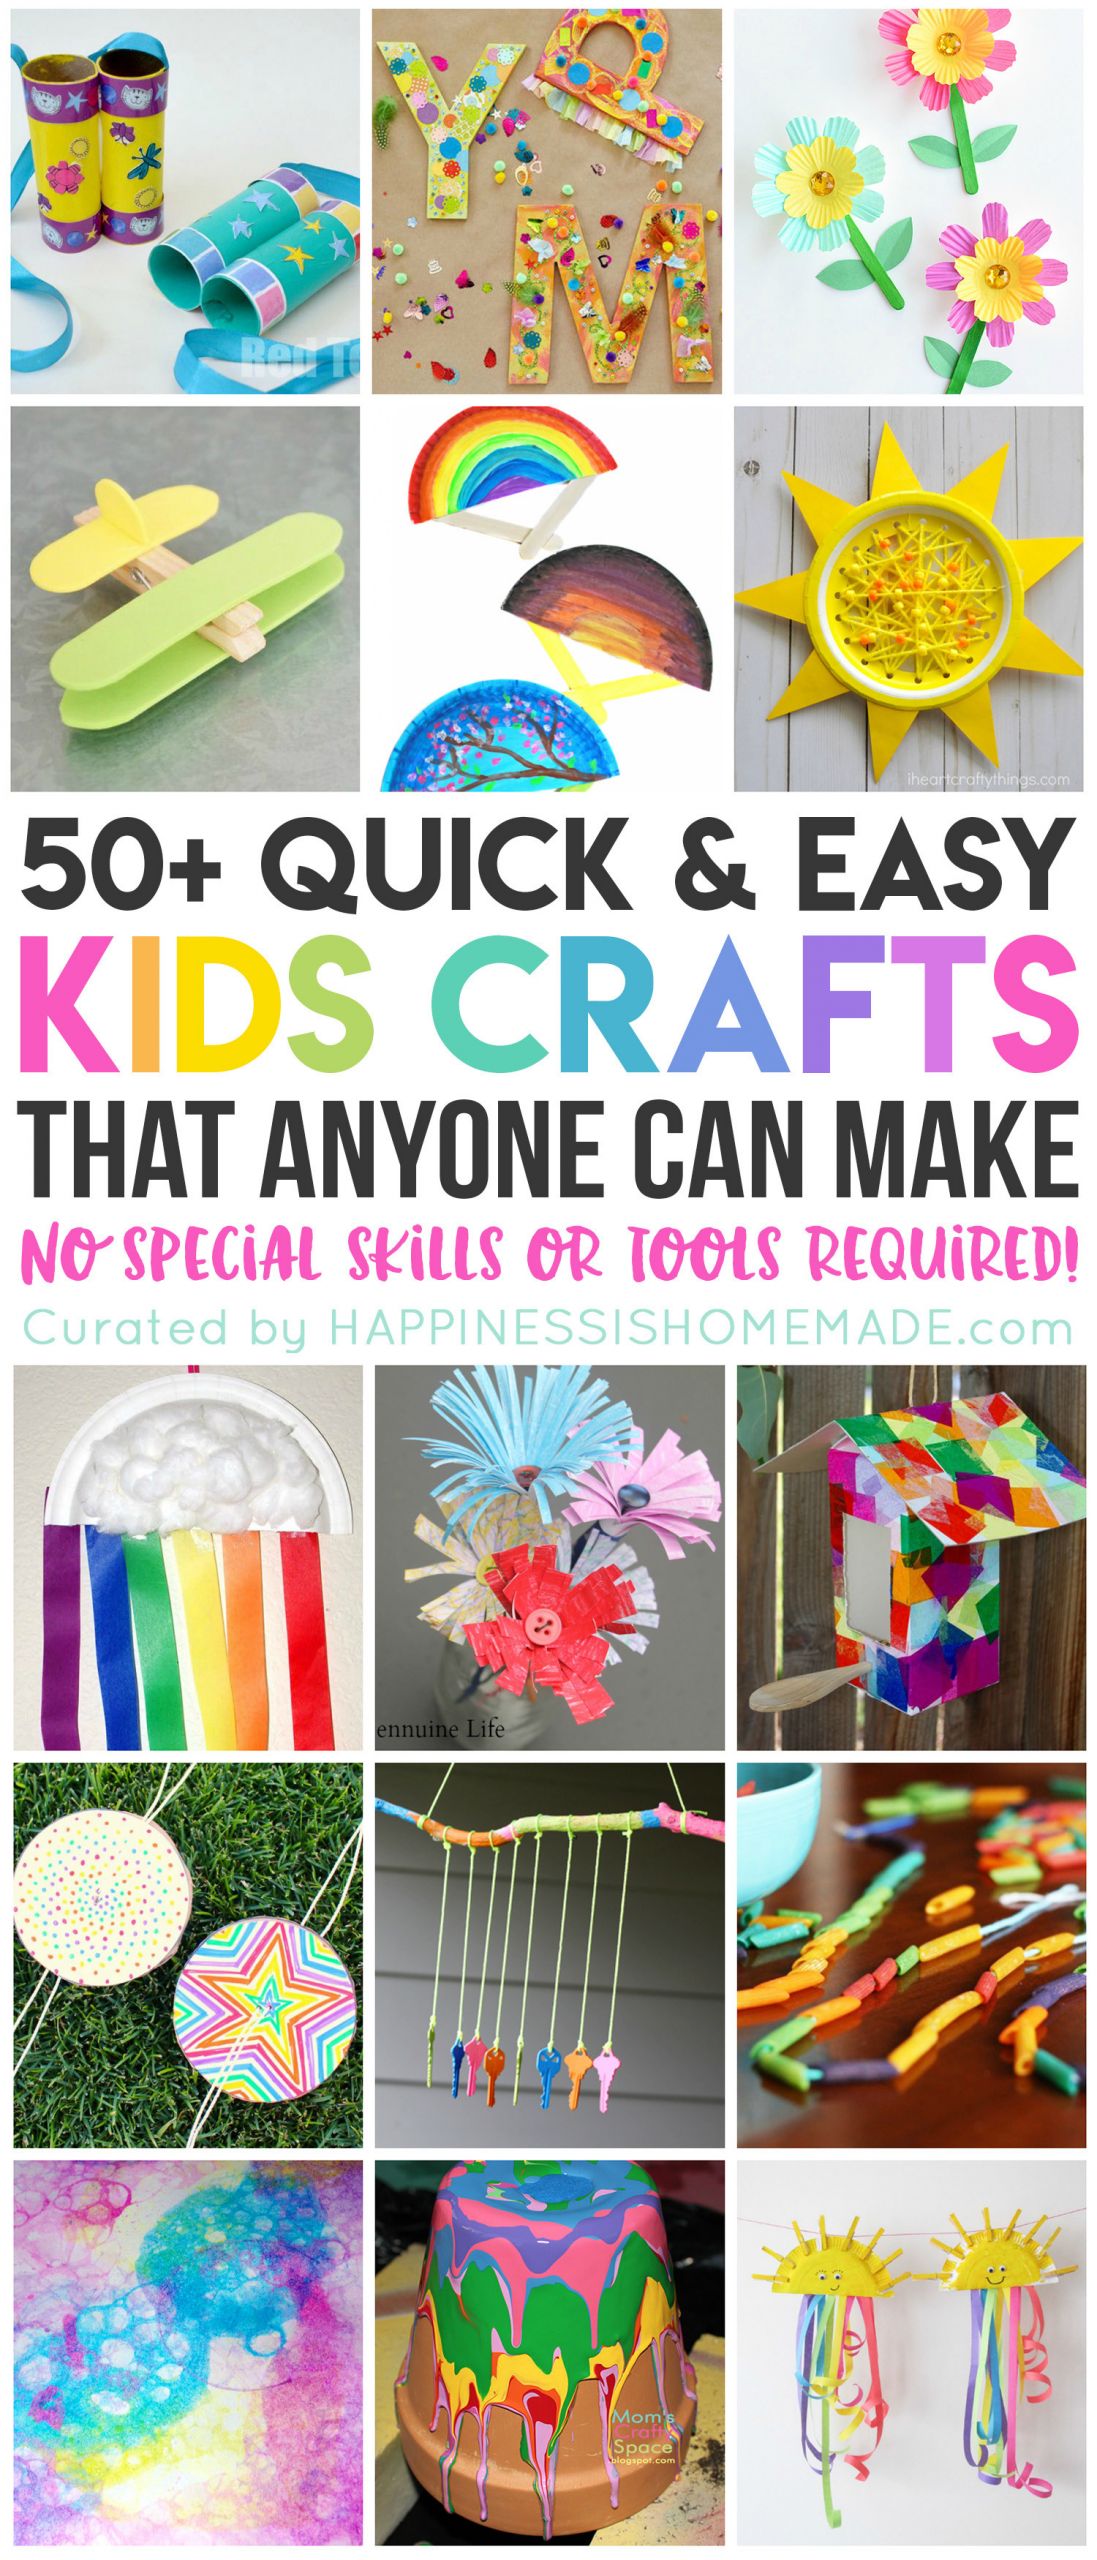 Art Things For Kids
 50 Quick & Easy Kids Crafts that ANYONE Can Make